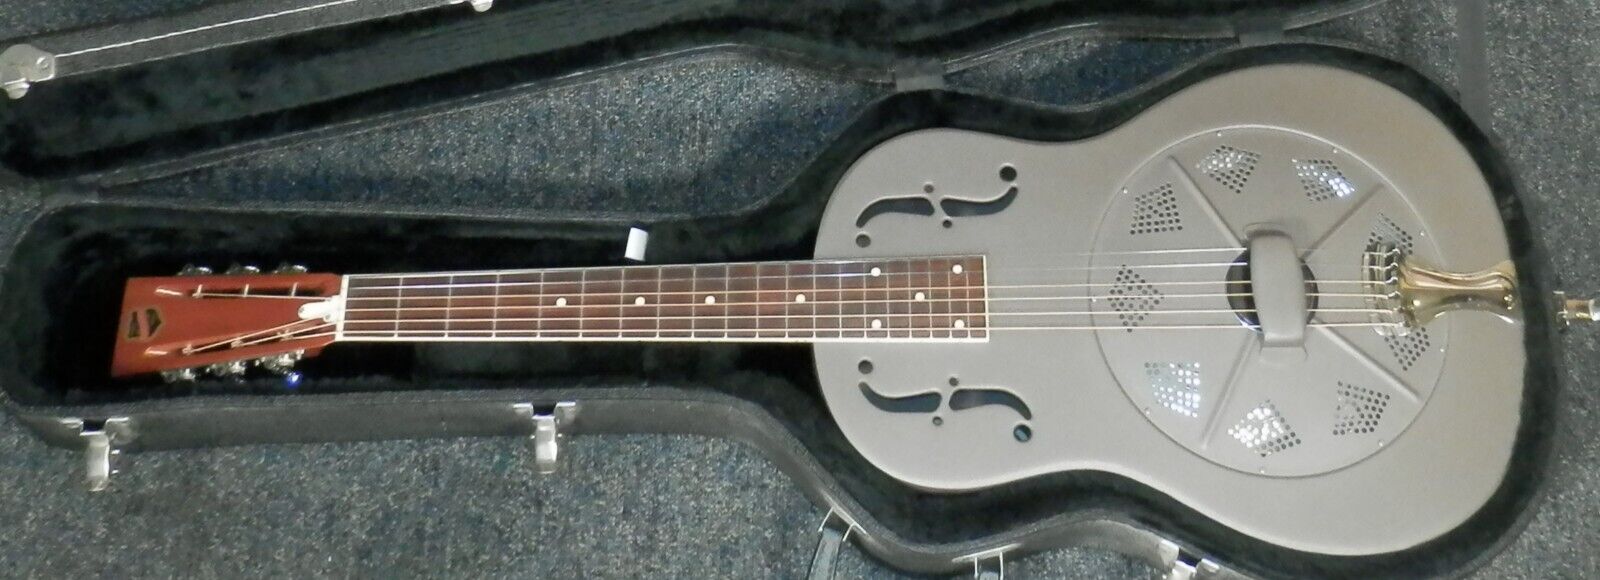 National Delphi Resonator Acoustic Guitar with case used Taupe Finish 3